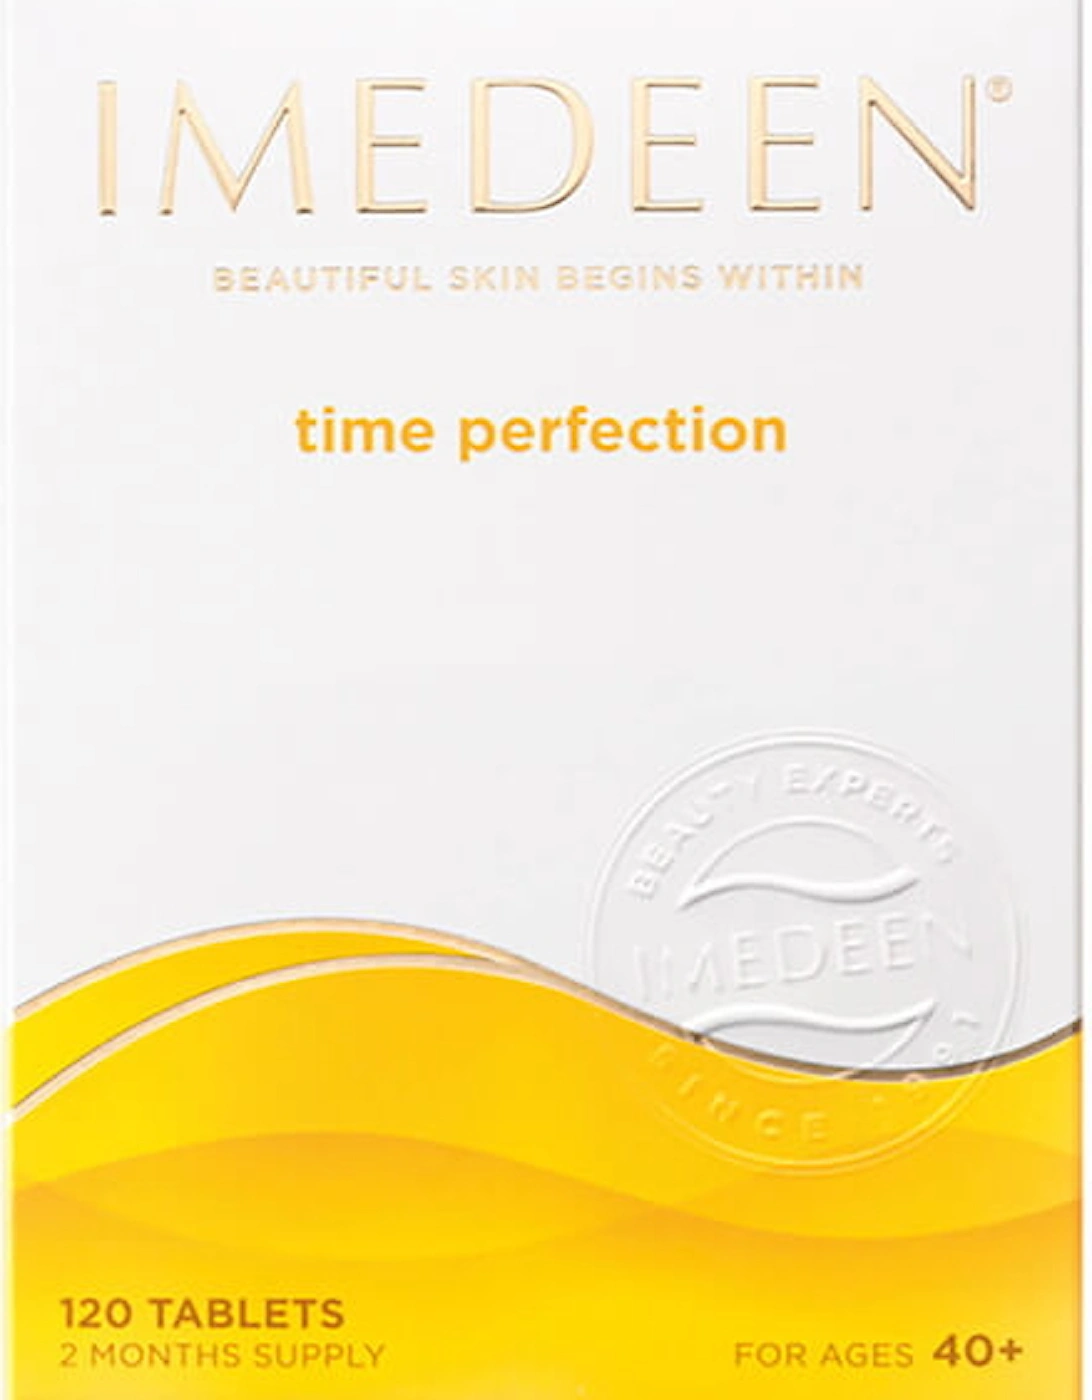 Time Perfection Beauty & Skin Supplement, contains Vitamin C and Zinc, 120 Tablets, Age 40+ - - Time Perfection (120 Tablets) - Ruby - Time Perfection (120 Tablets) - Clare - Time Perfection (120 Tablets) - Kena, 2 of 1